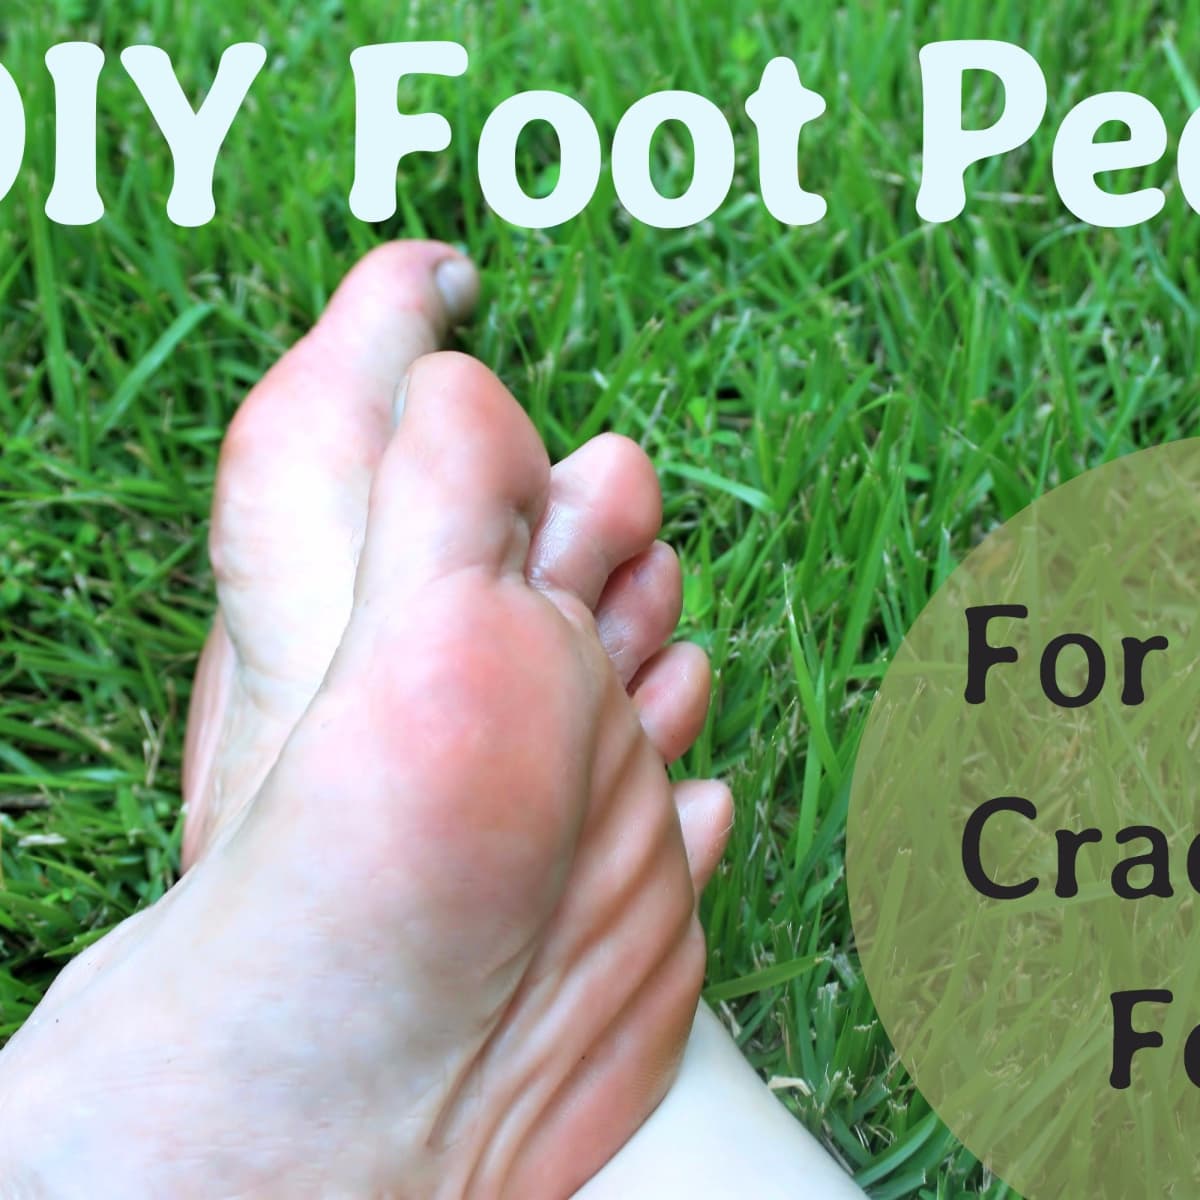 solely use your feet